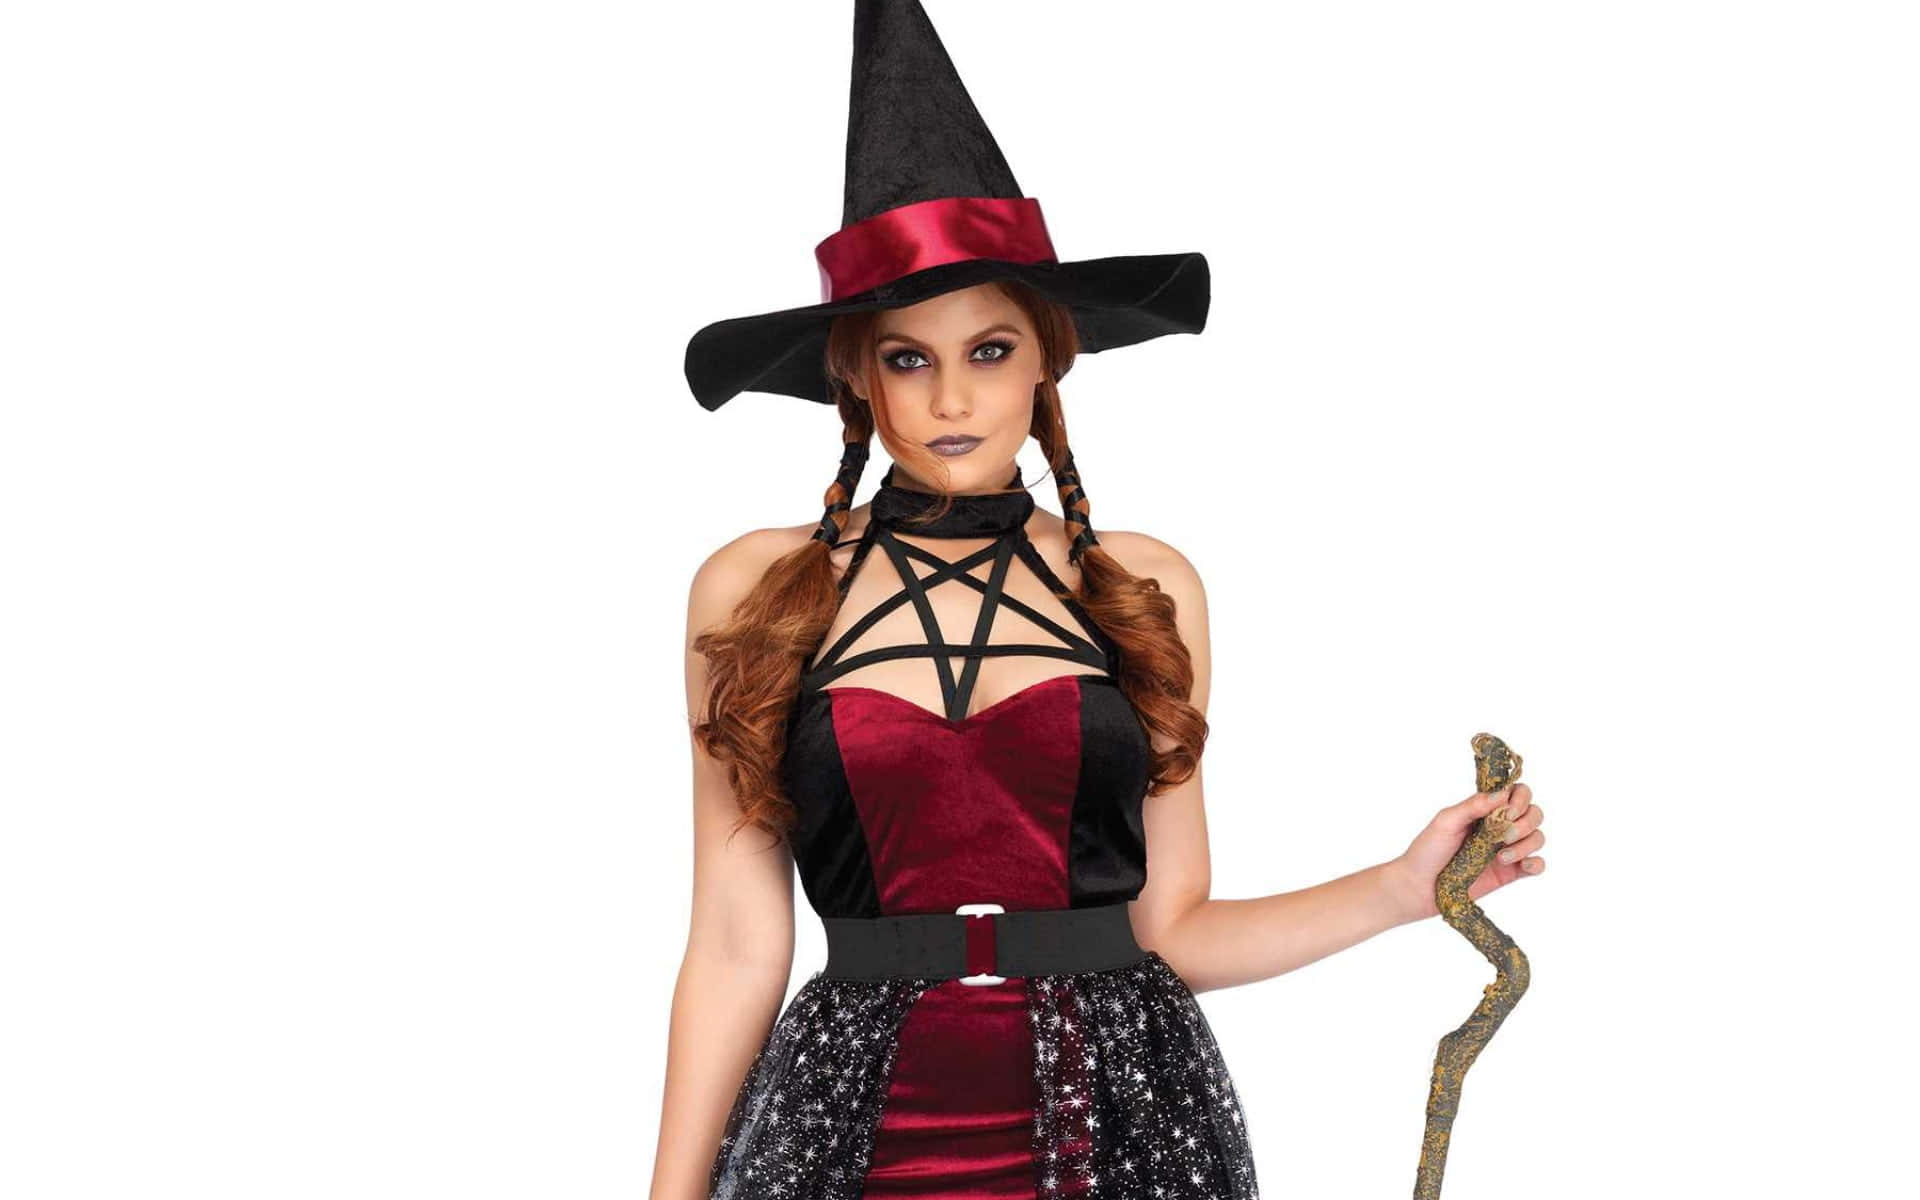 “Unlock your spooky side with this classic witch costume this Halloween!”